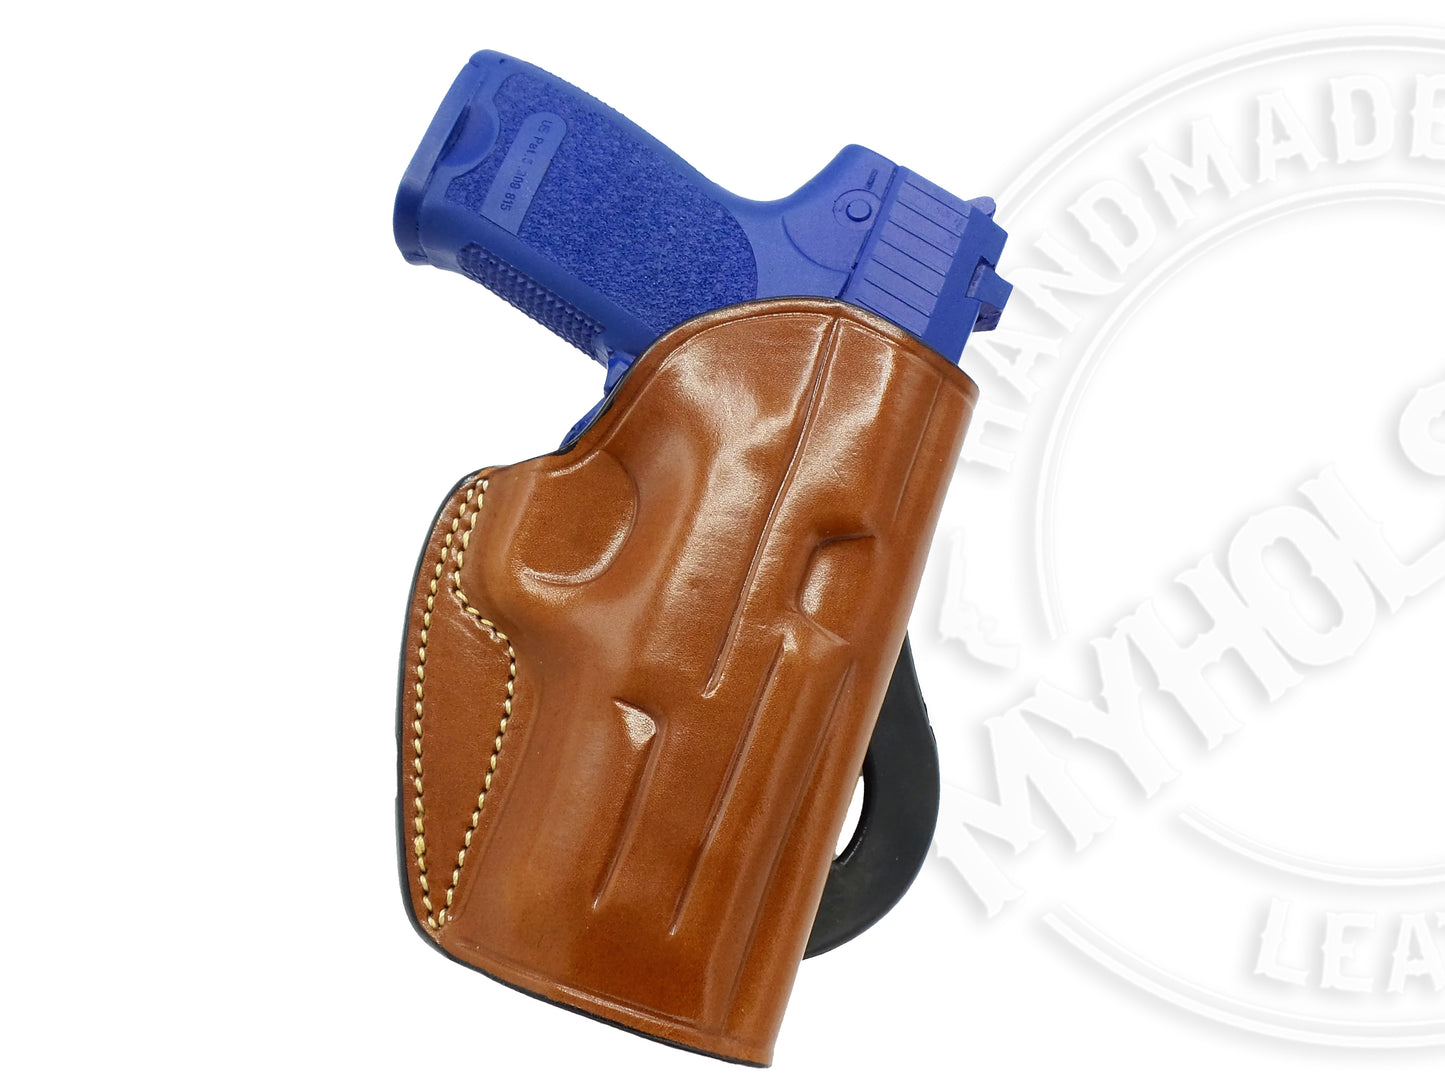 Sig Sauer P365 XL OWB Quick Draw Right Hand Leather Paddle Holster